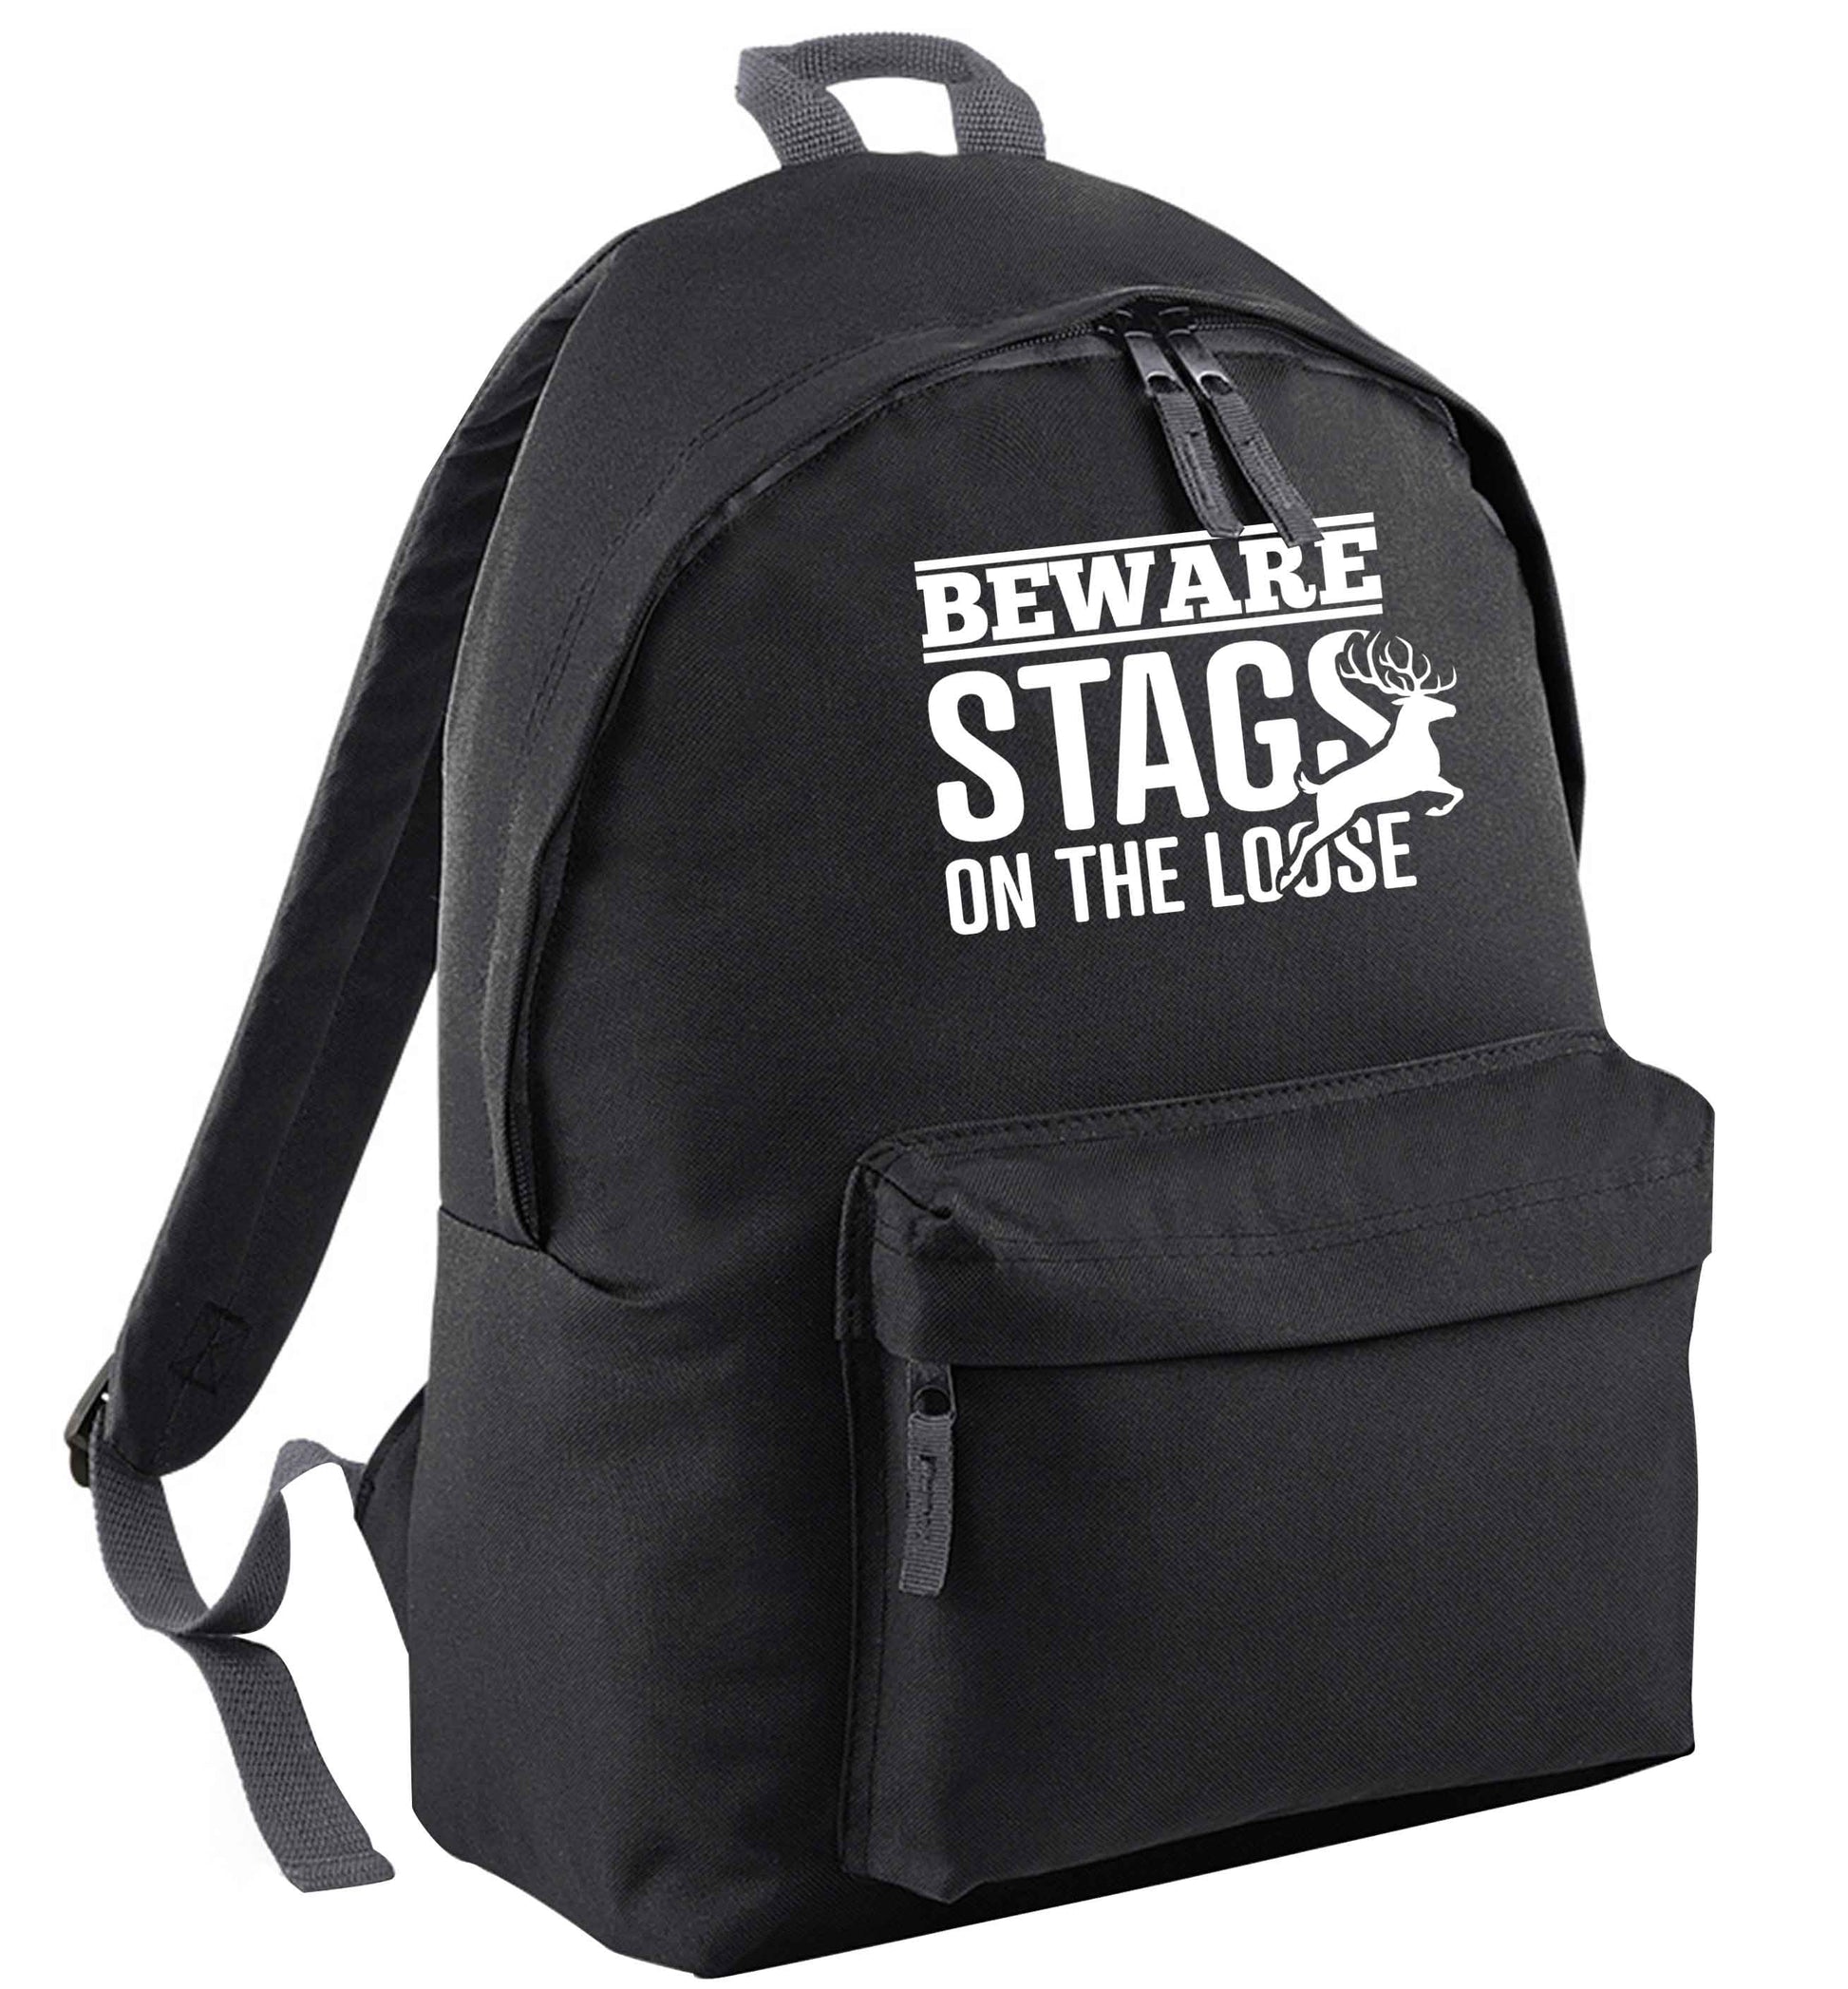 Beware stags on the loose black adults backpack